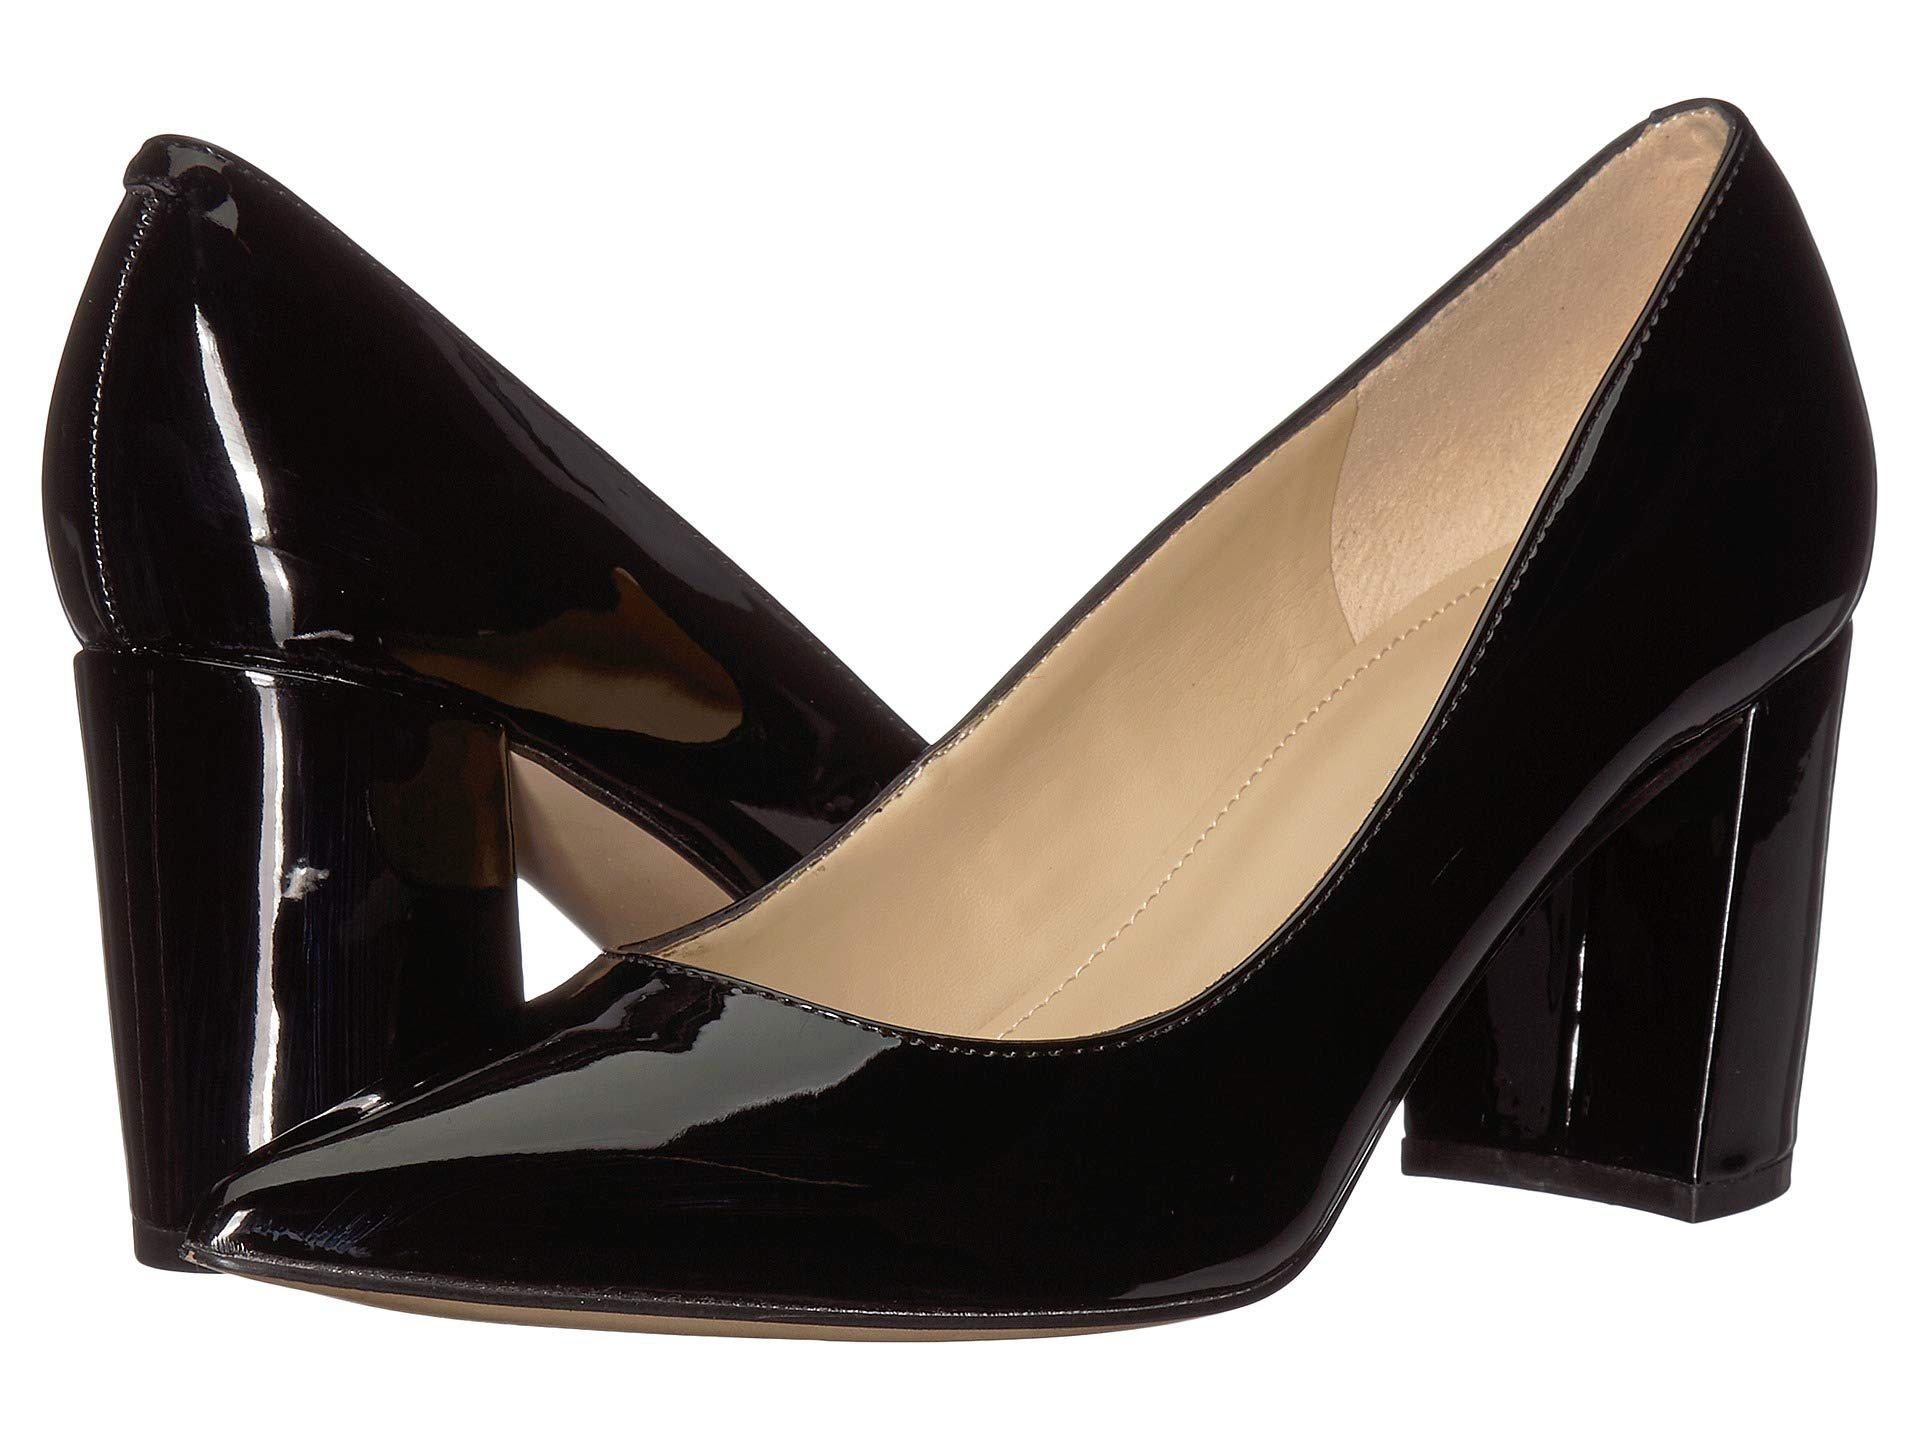 Marc Fisher Claire 2 (nero) High Heels in Black - Lyst